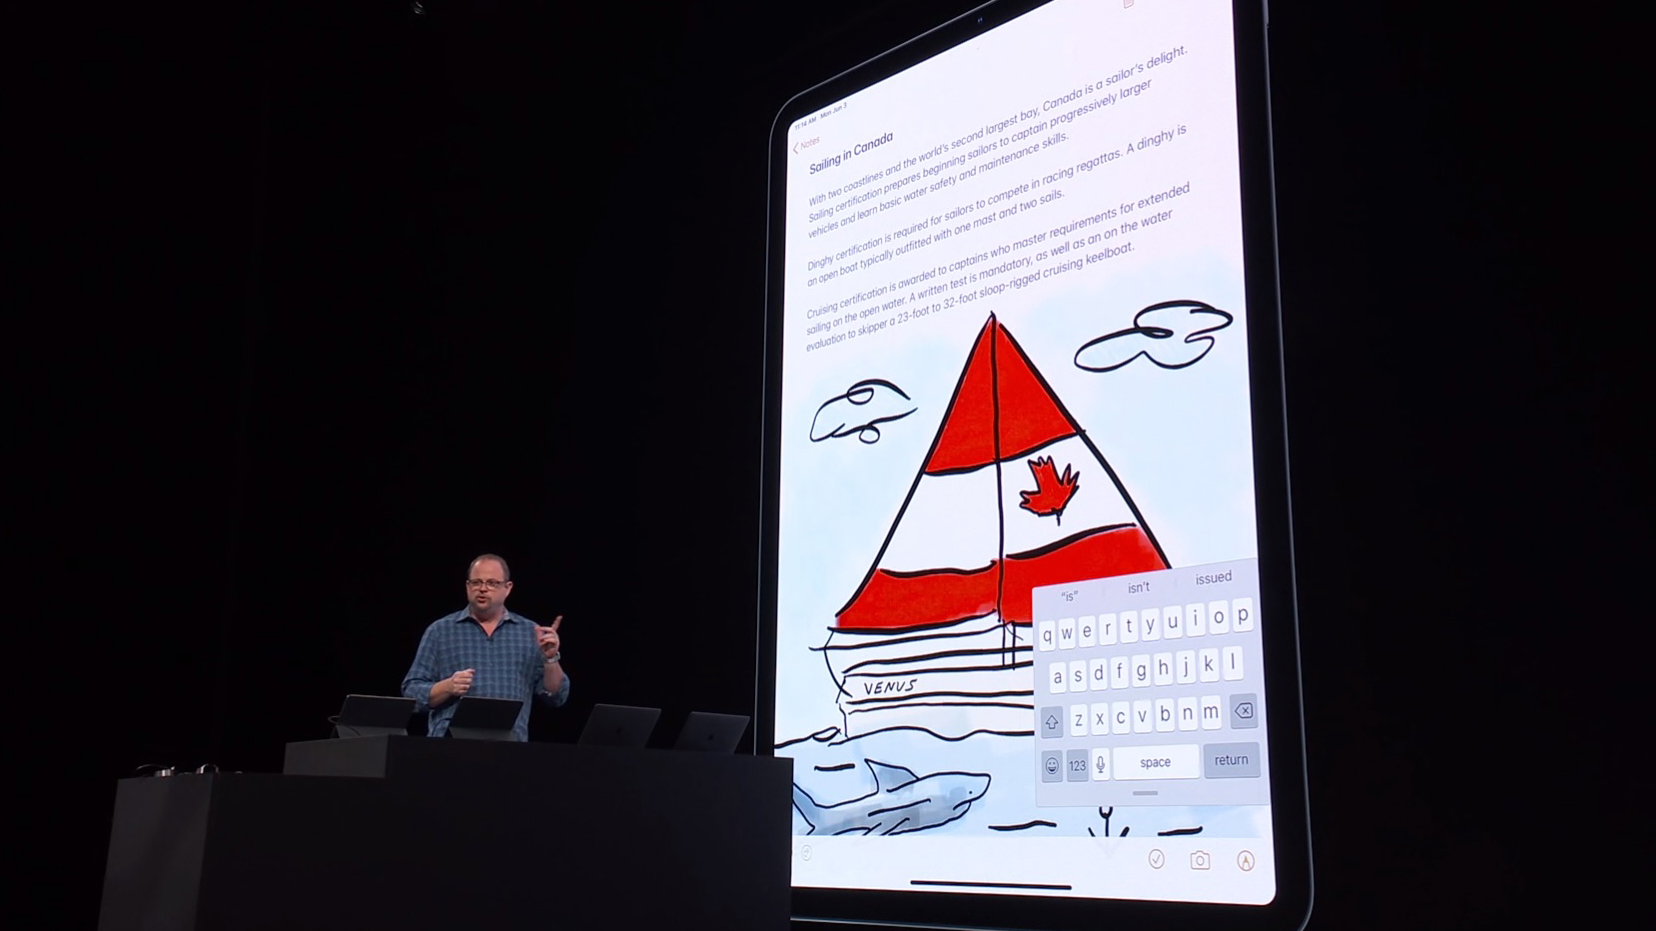 A screenshot from the Apple WWDC 2019 event.